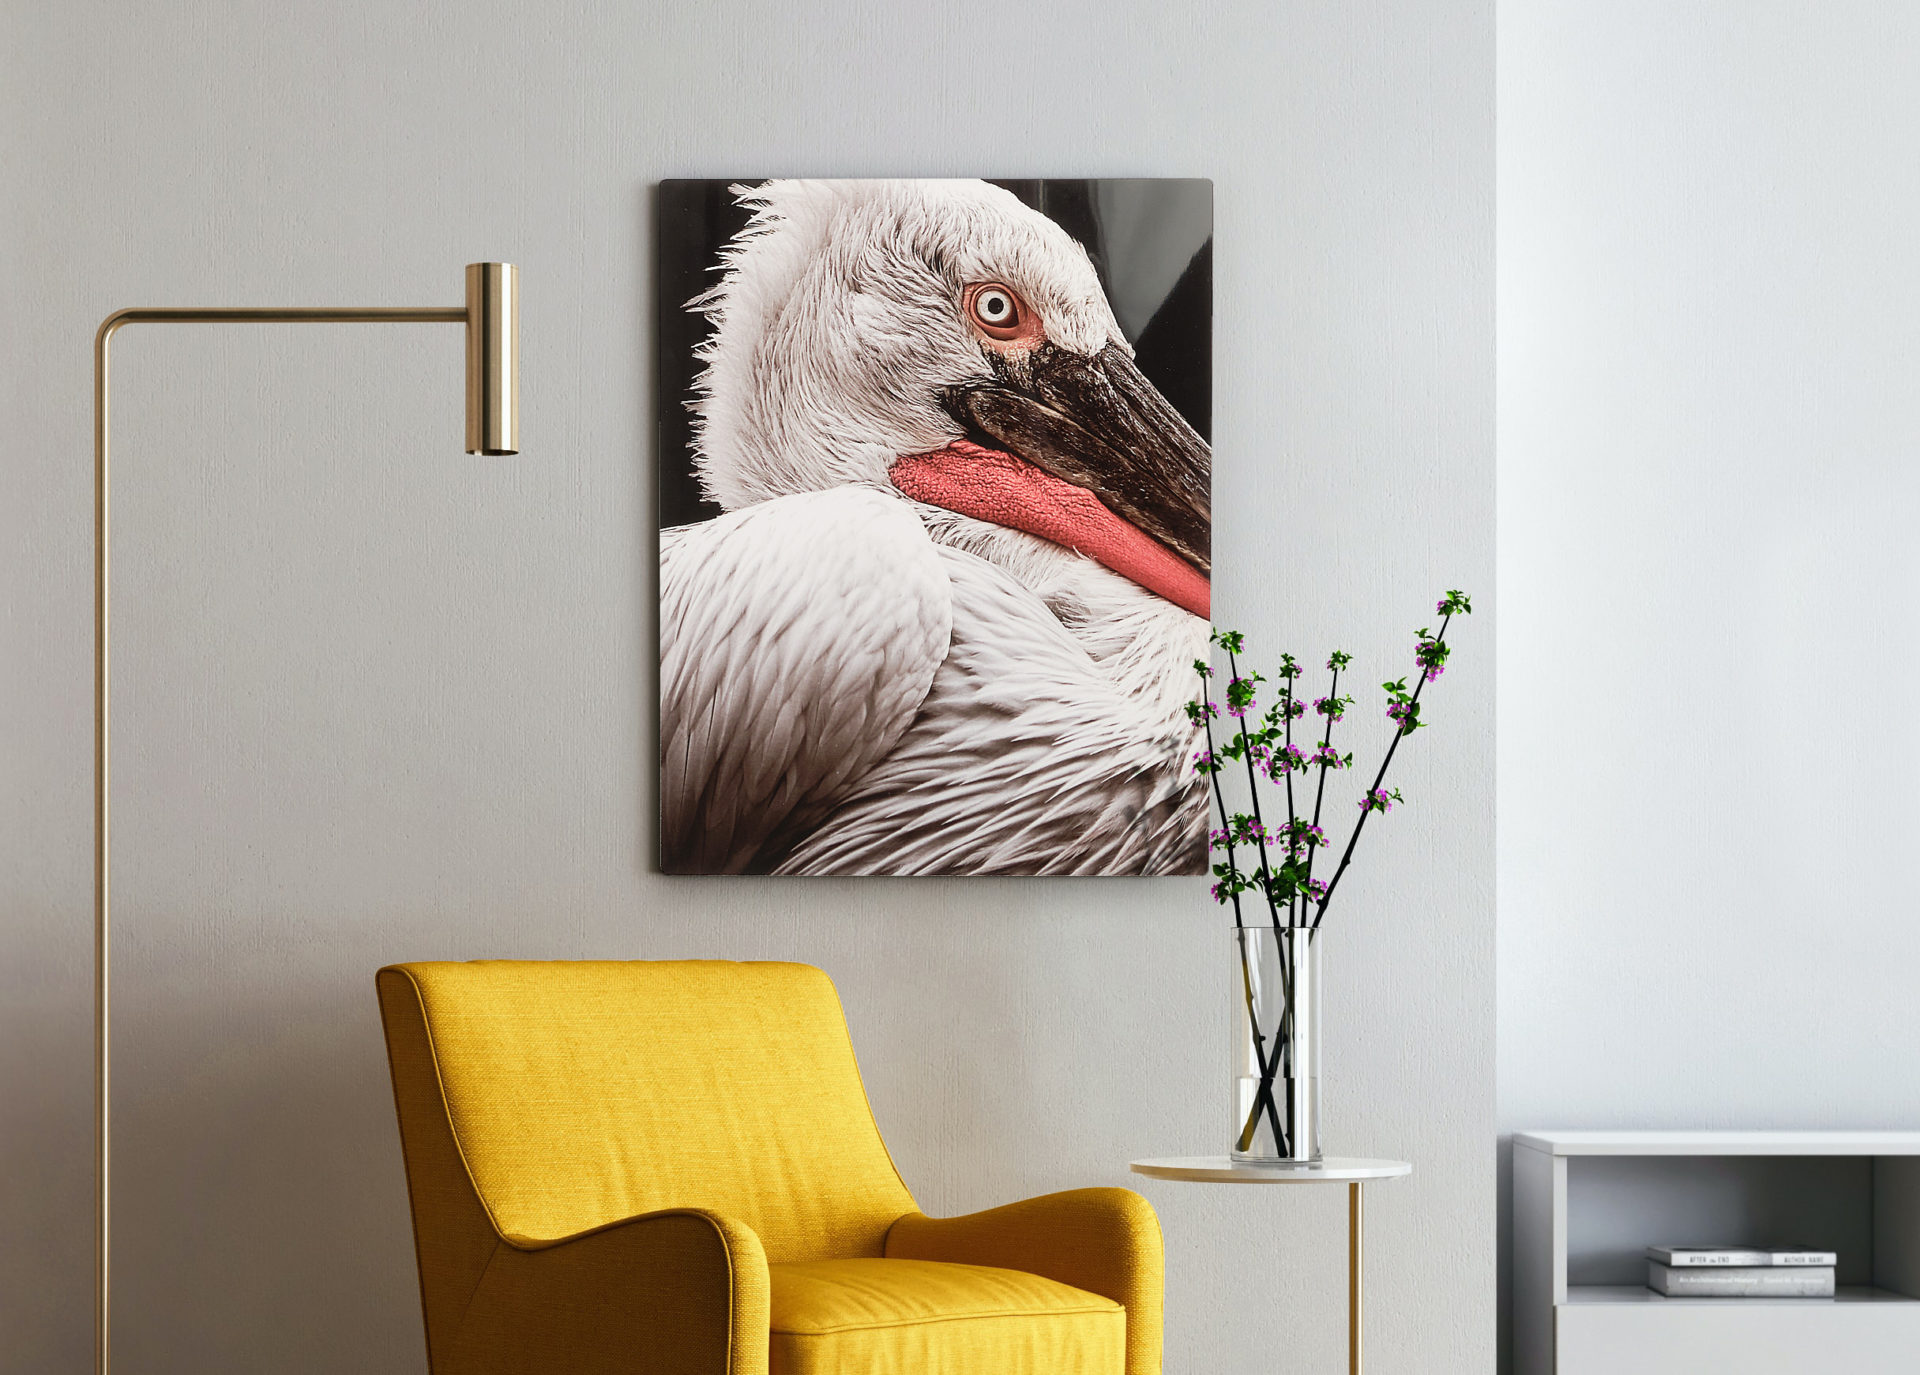 A custom metal print of a pelican hanging on a wall next to a yellow chair, side table and lamp.